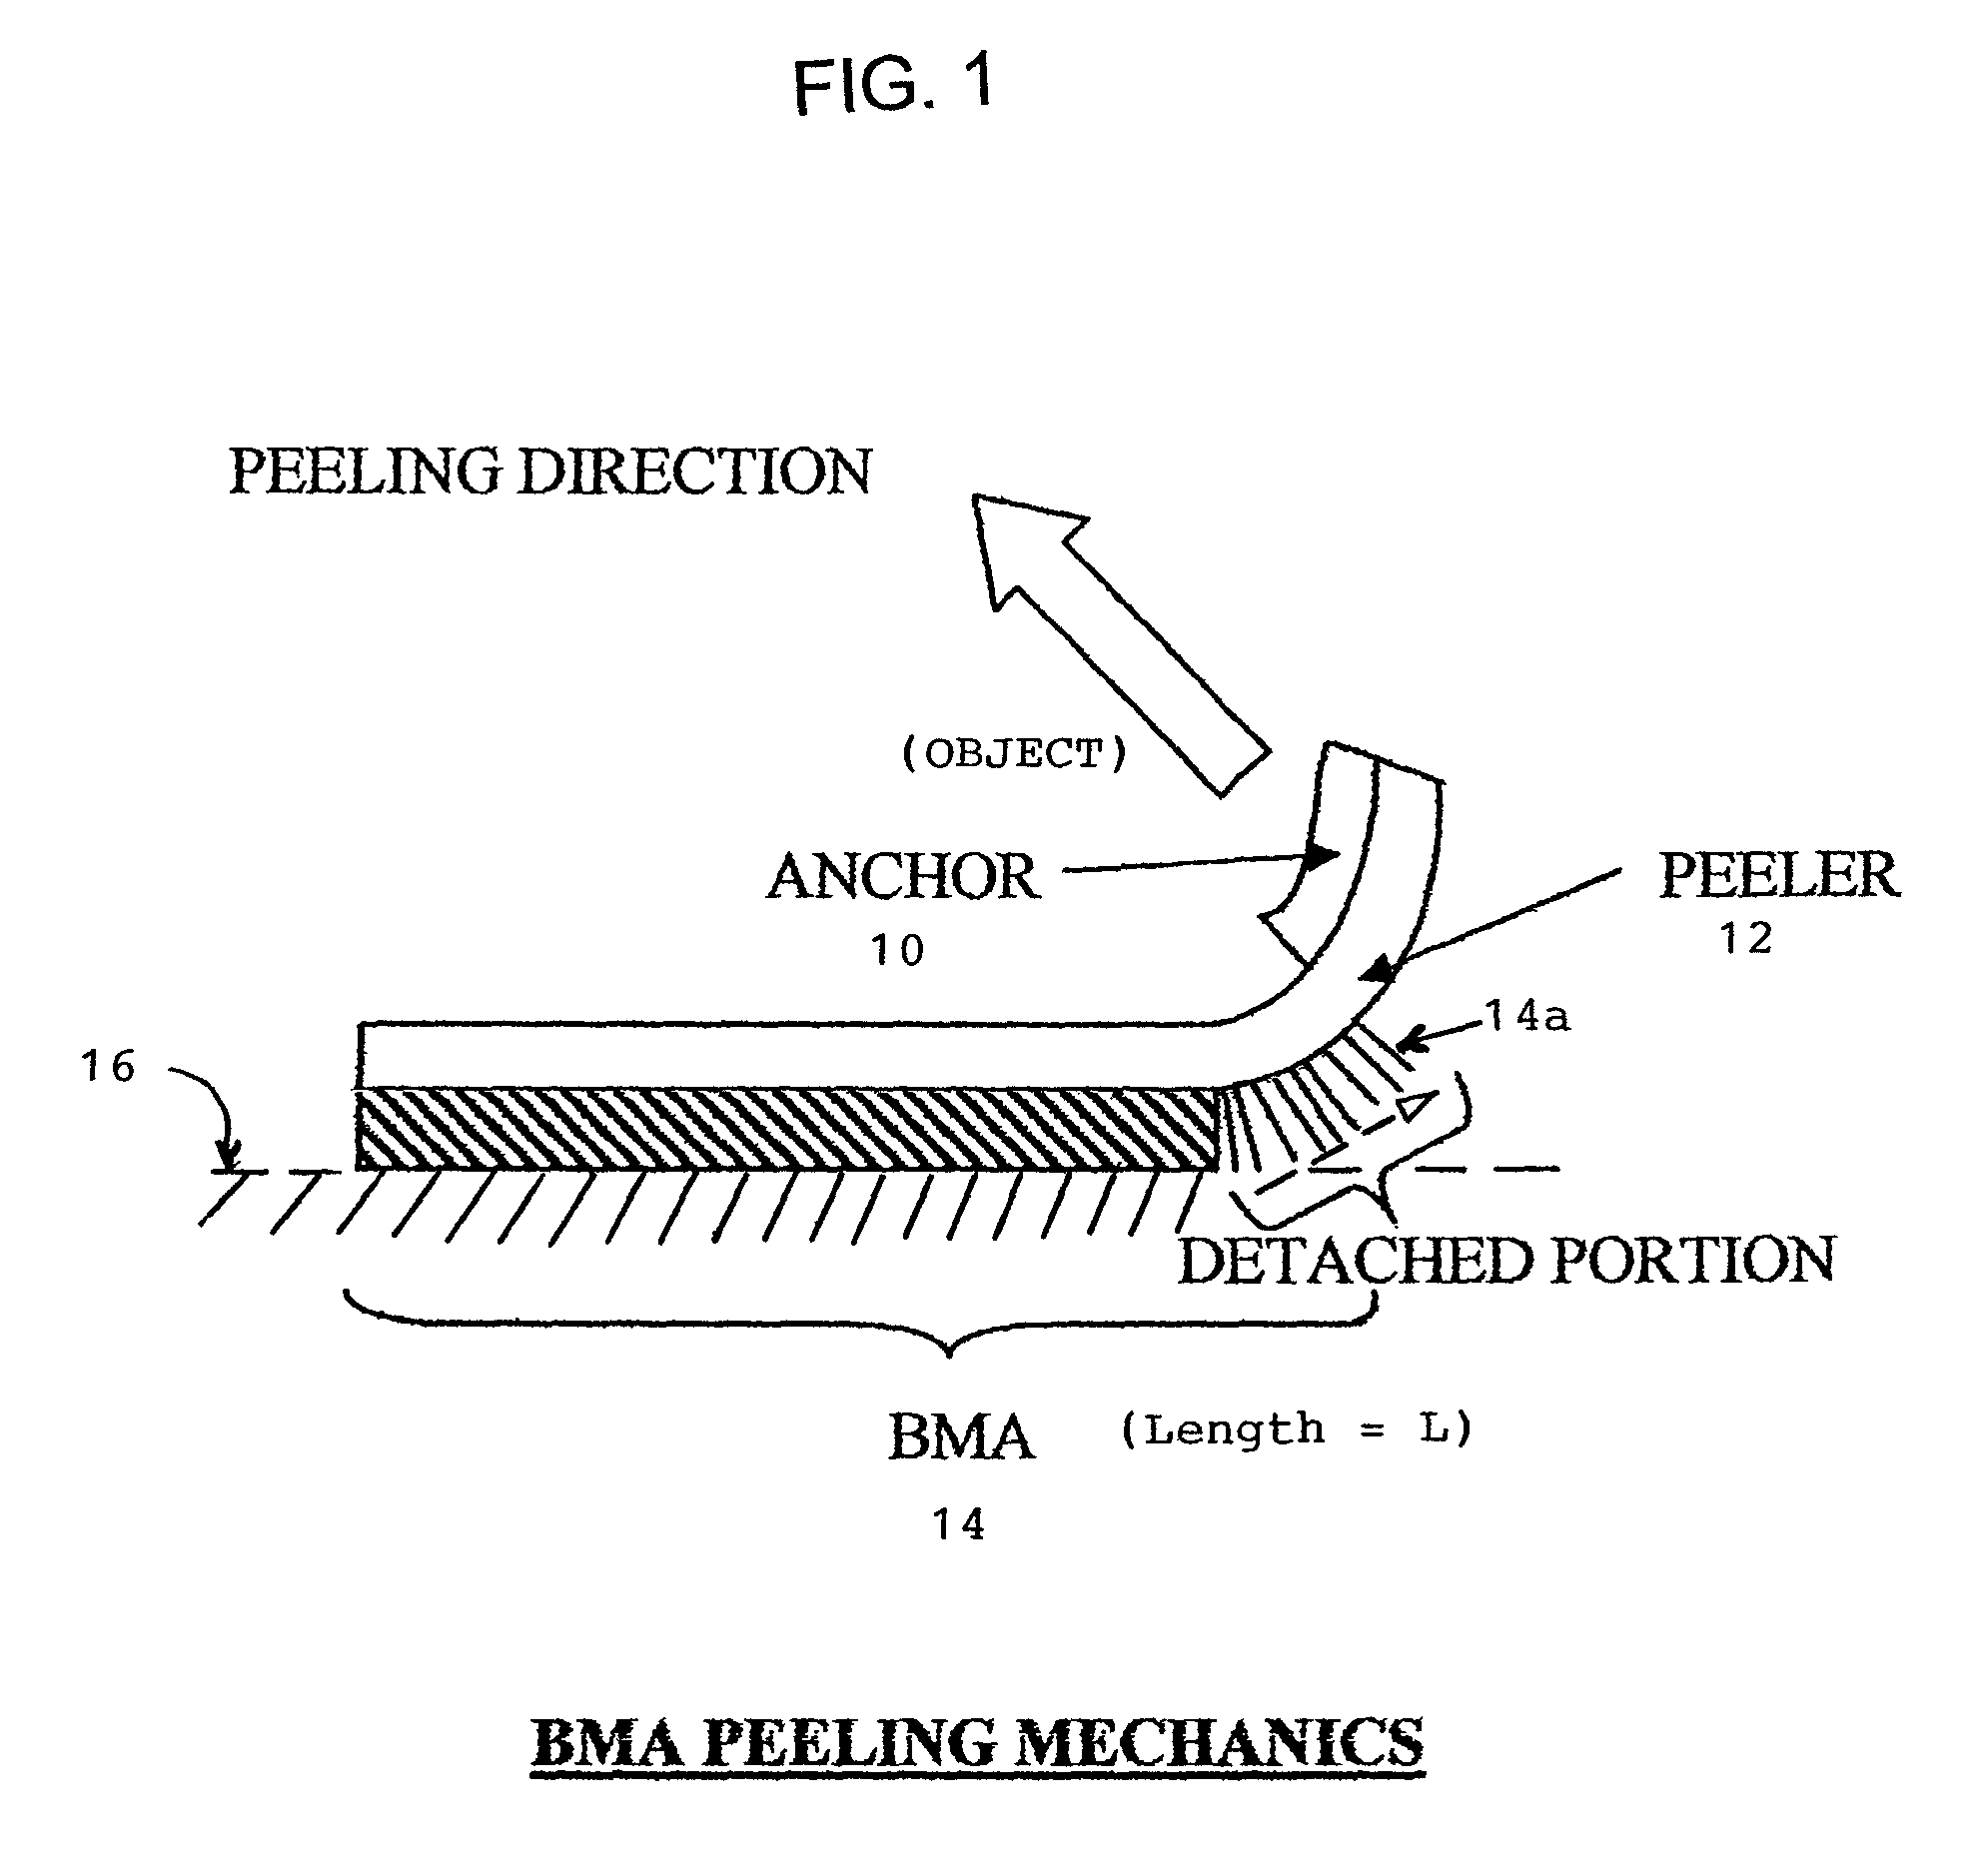 Adhesion device for applying and releasing biomimetic microstructure adhesive from a contact surface